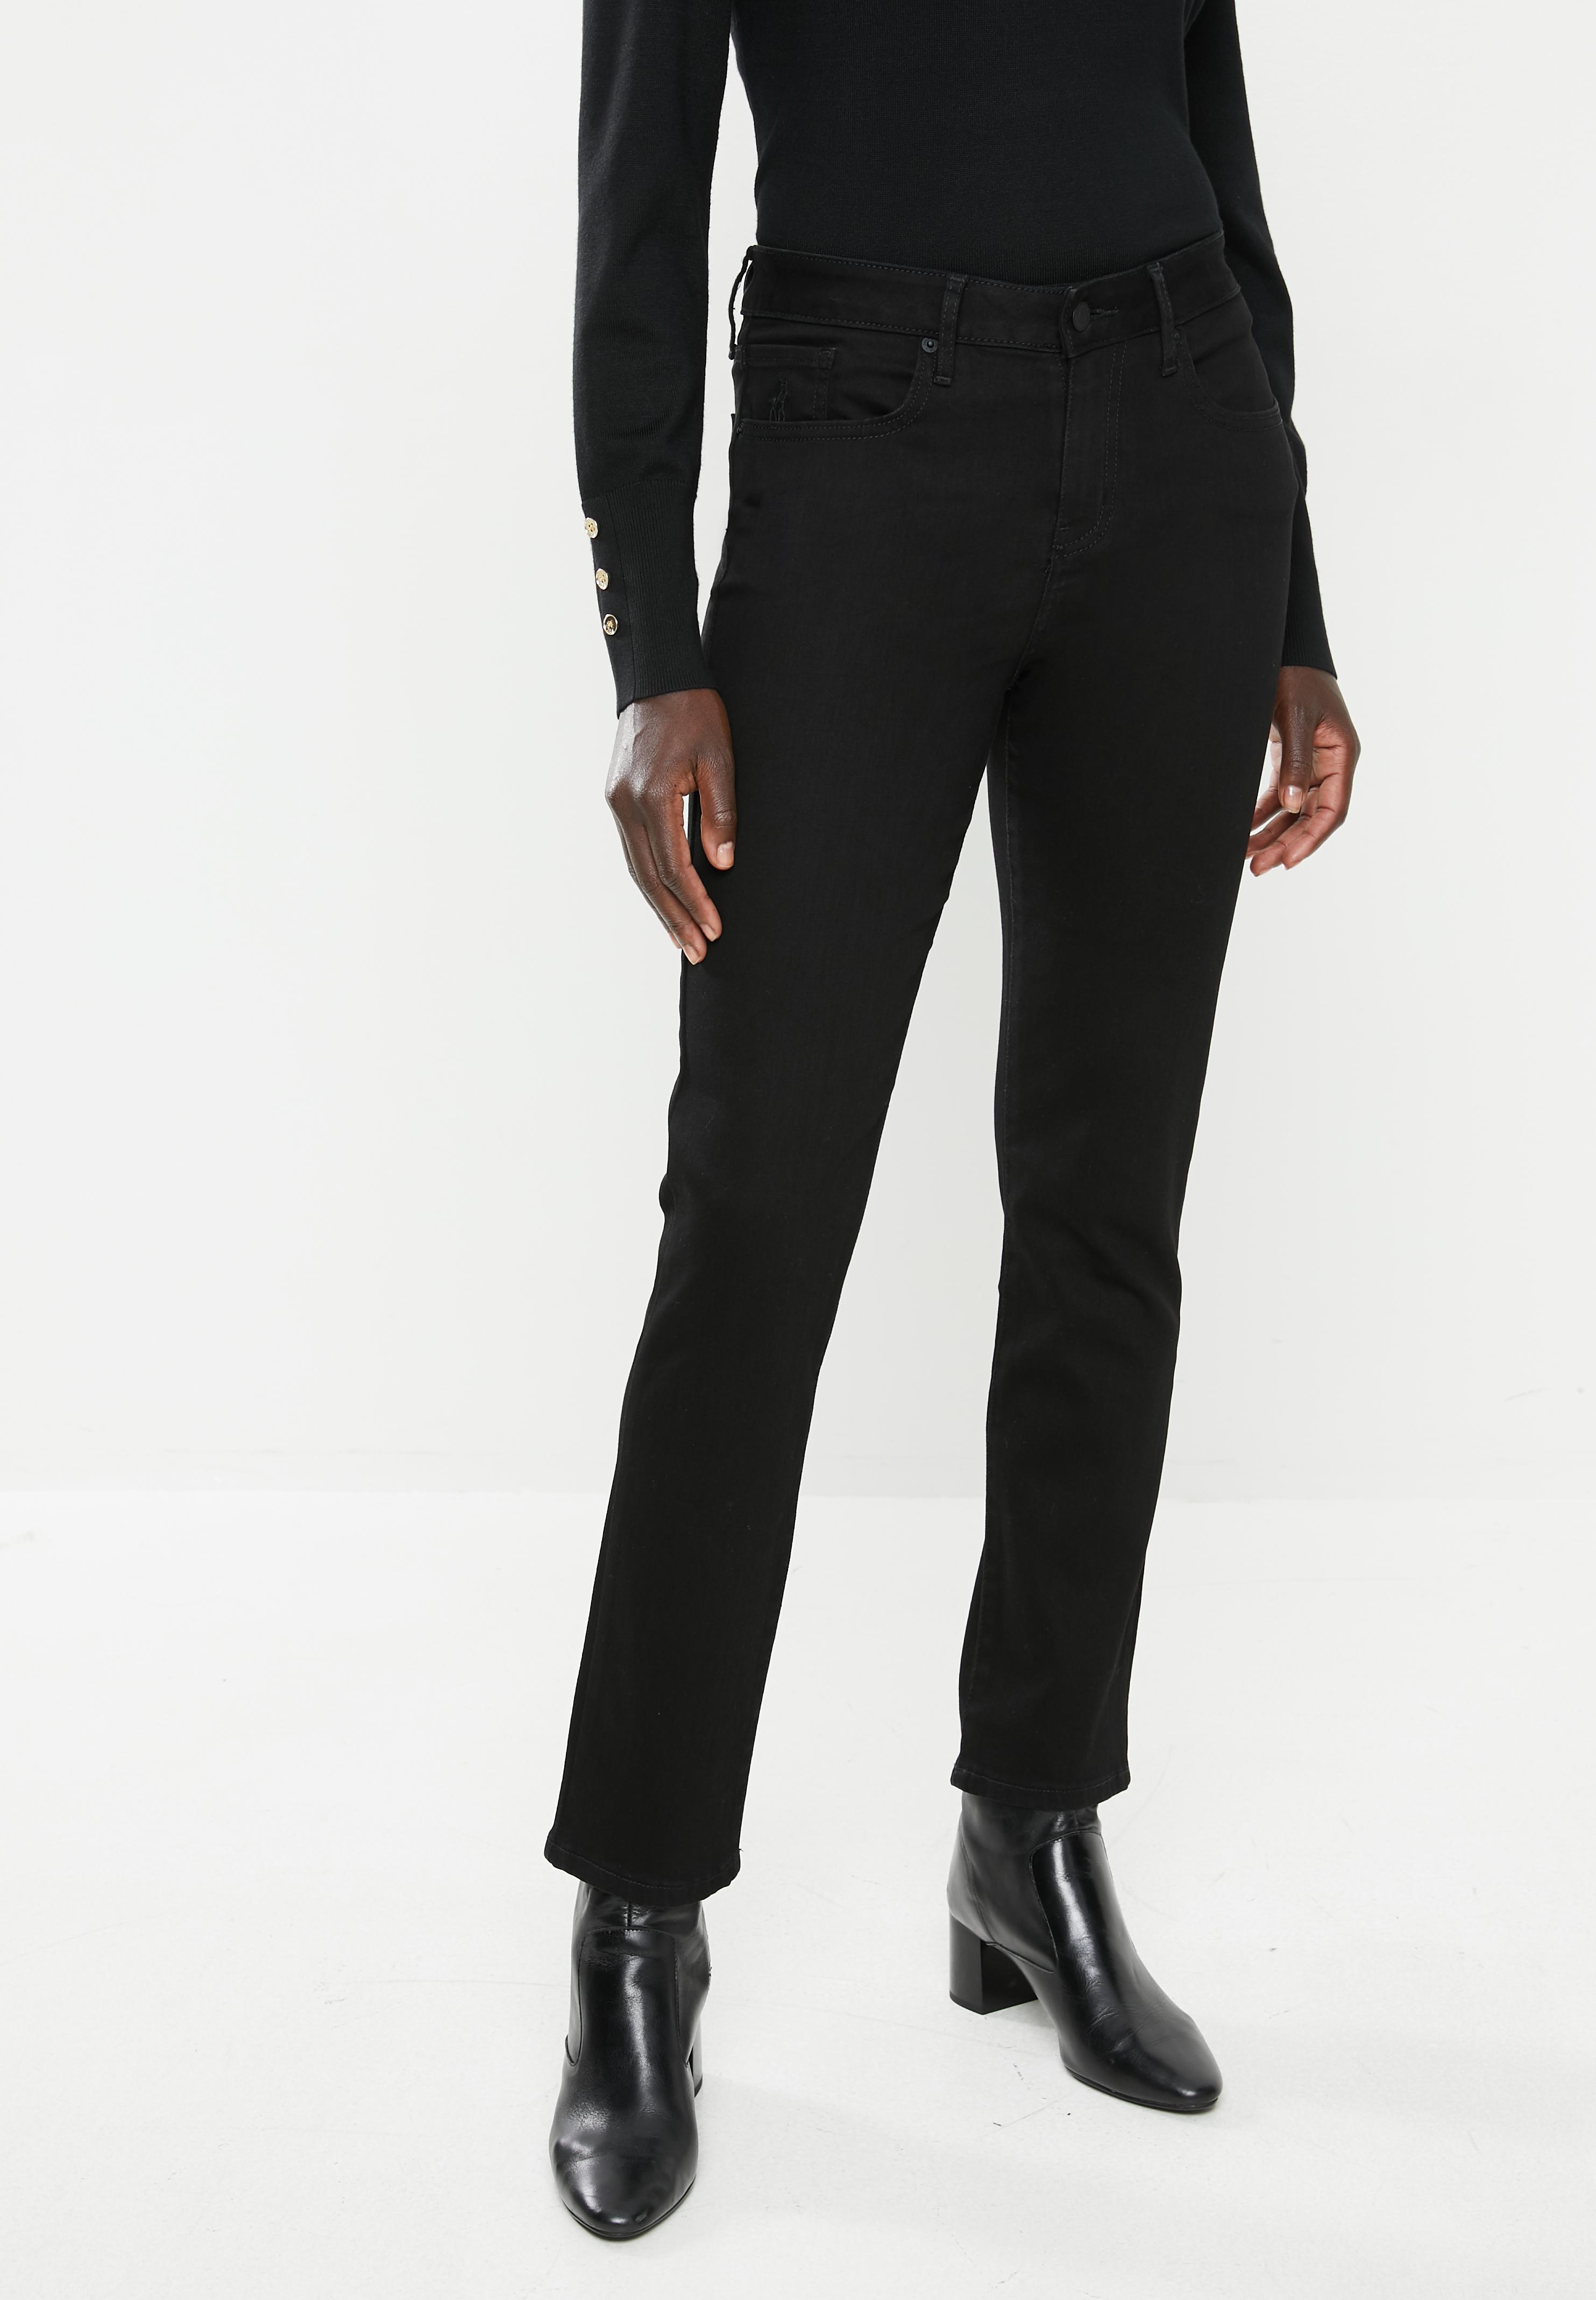 Stacey business jean - black POLO Jeans | Superbalist.com